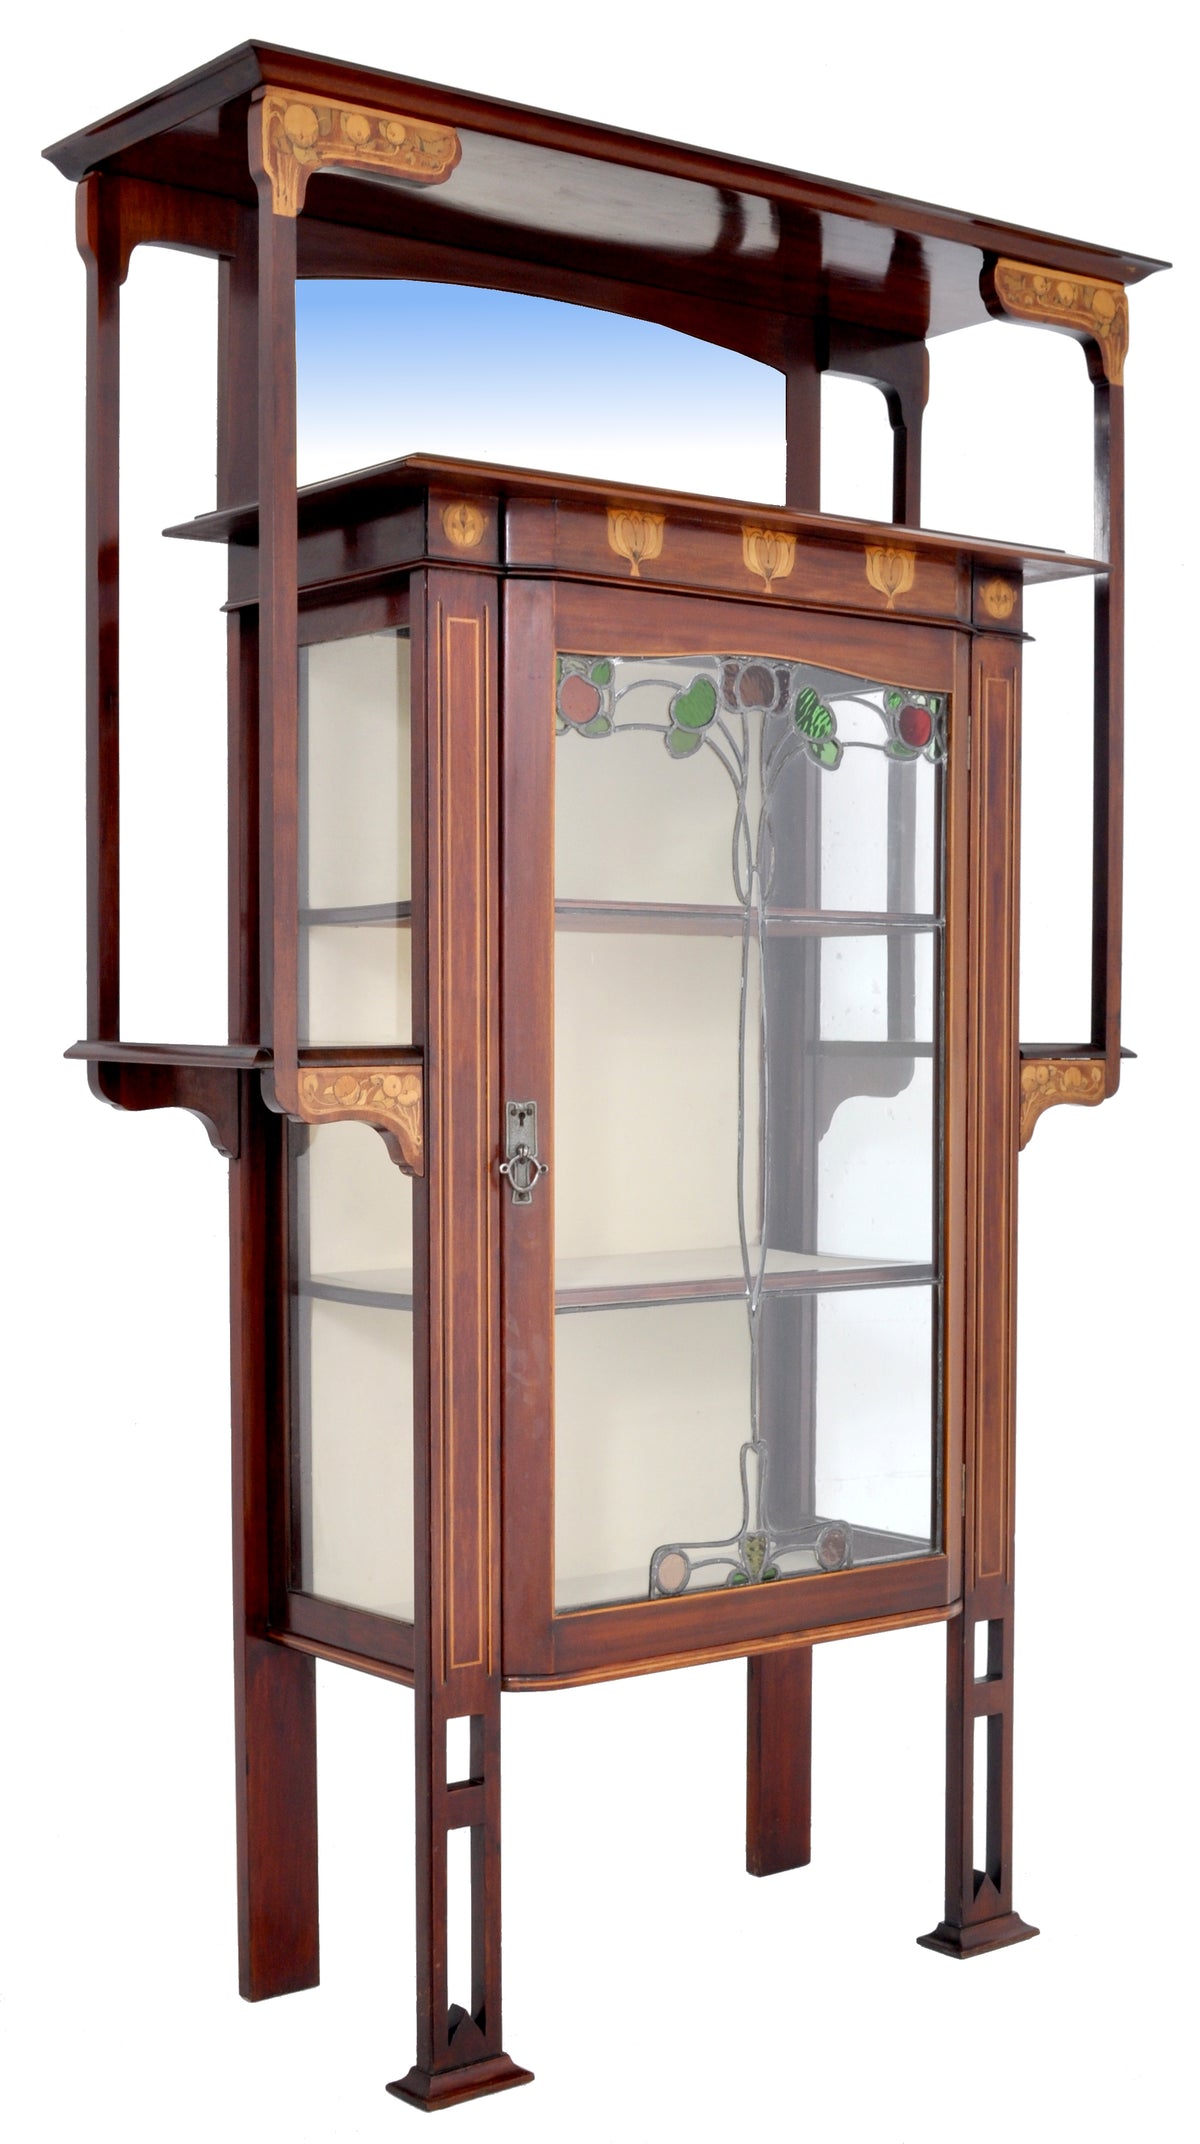 Antique Art Nouveau Inlaid Mahogany China Cabinet by Shapland & Petter for Liberty of London, Circa 1900